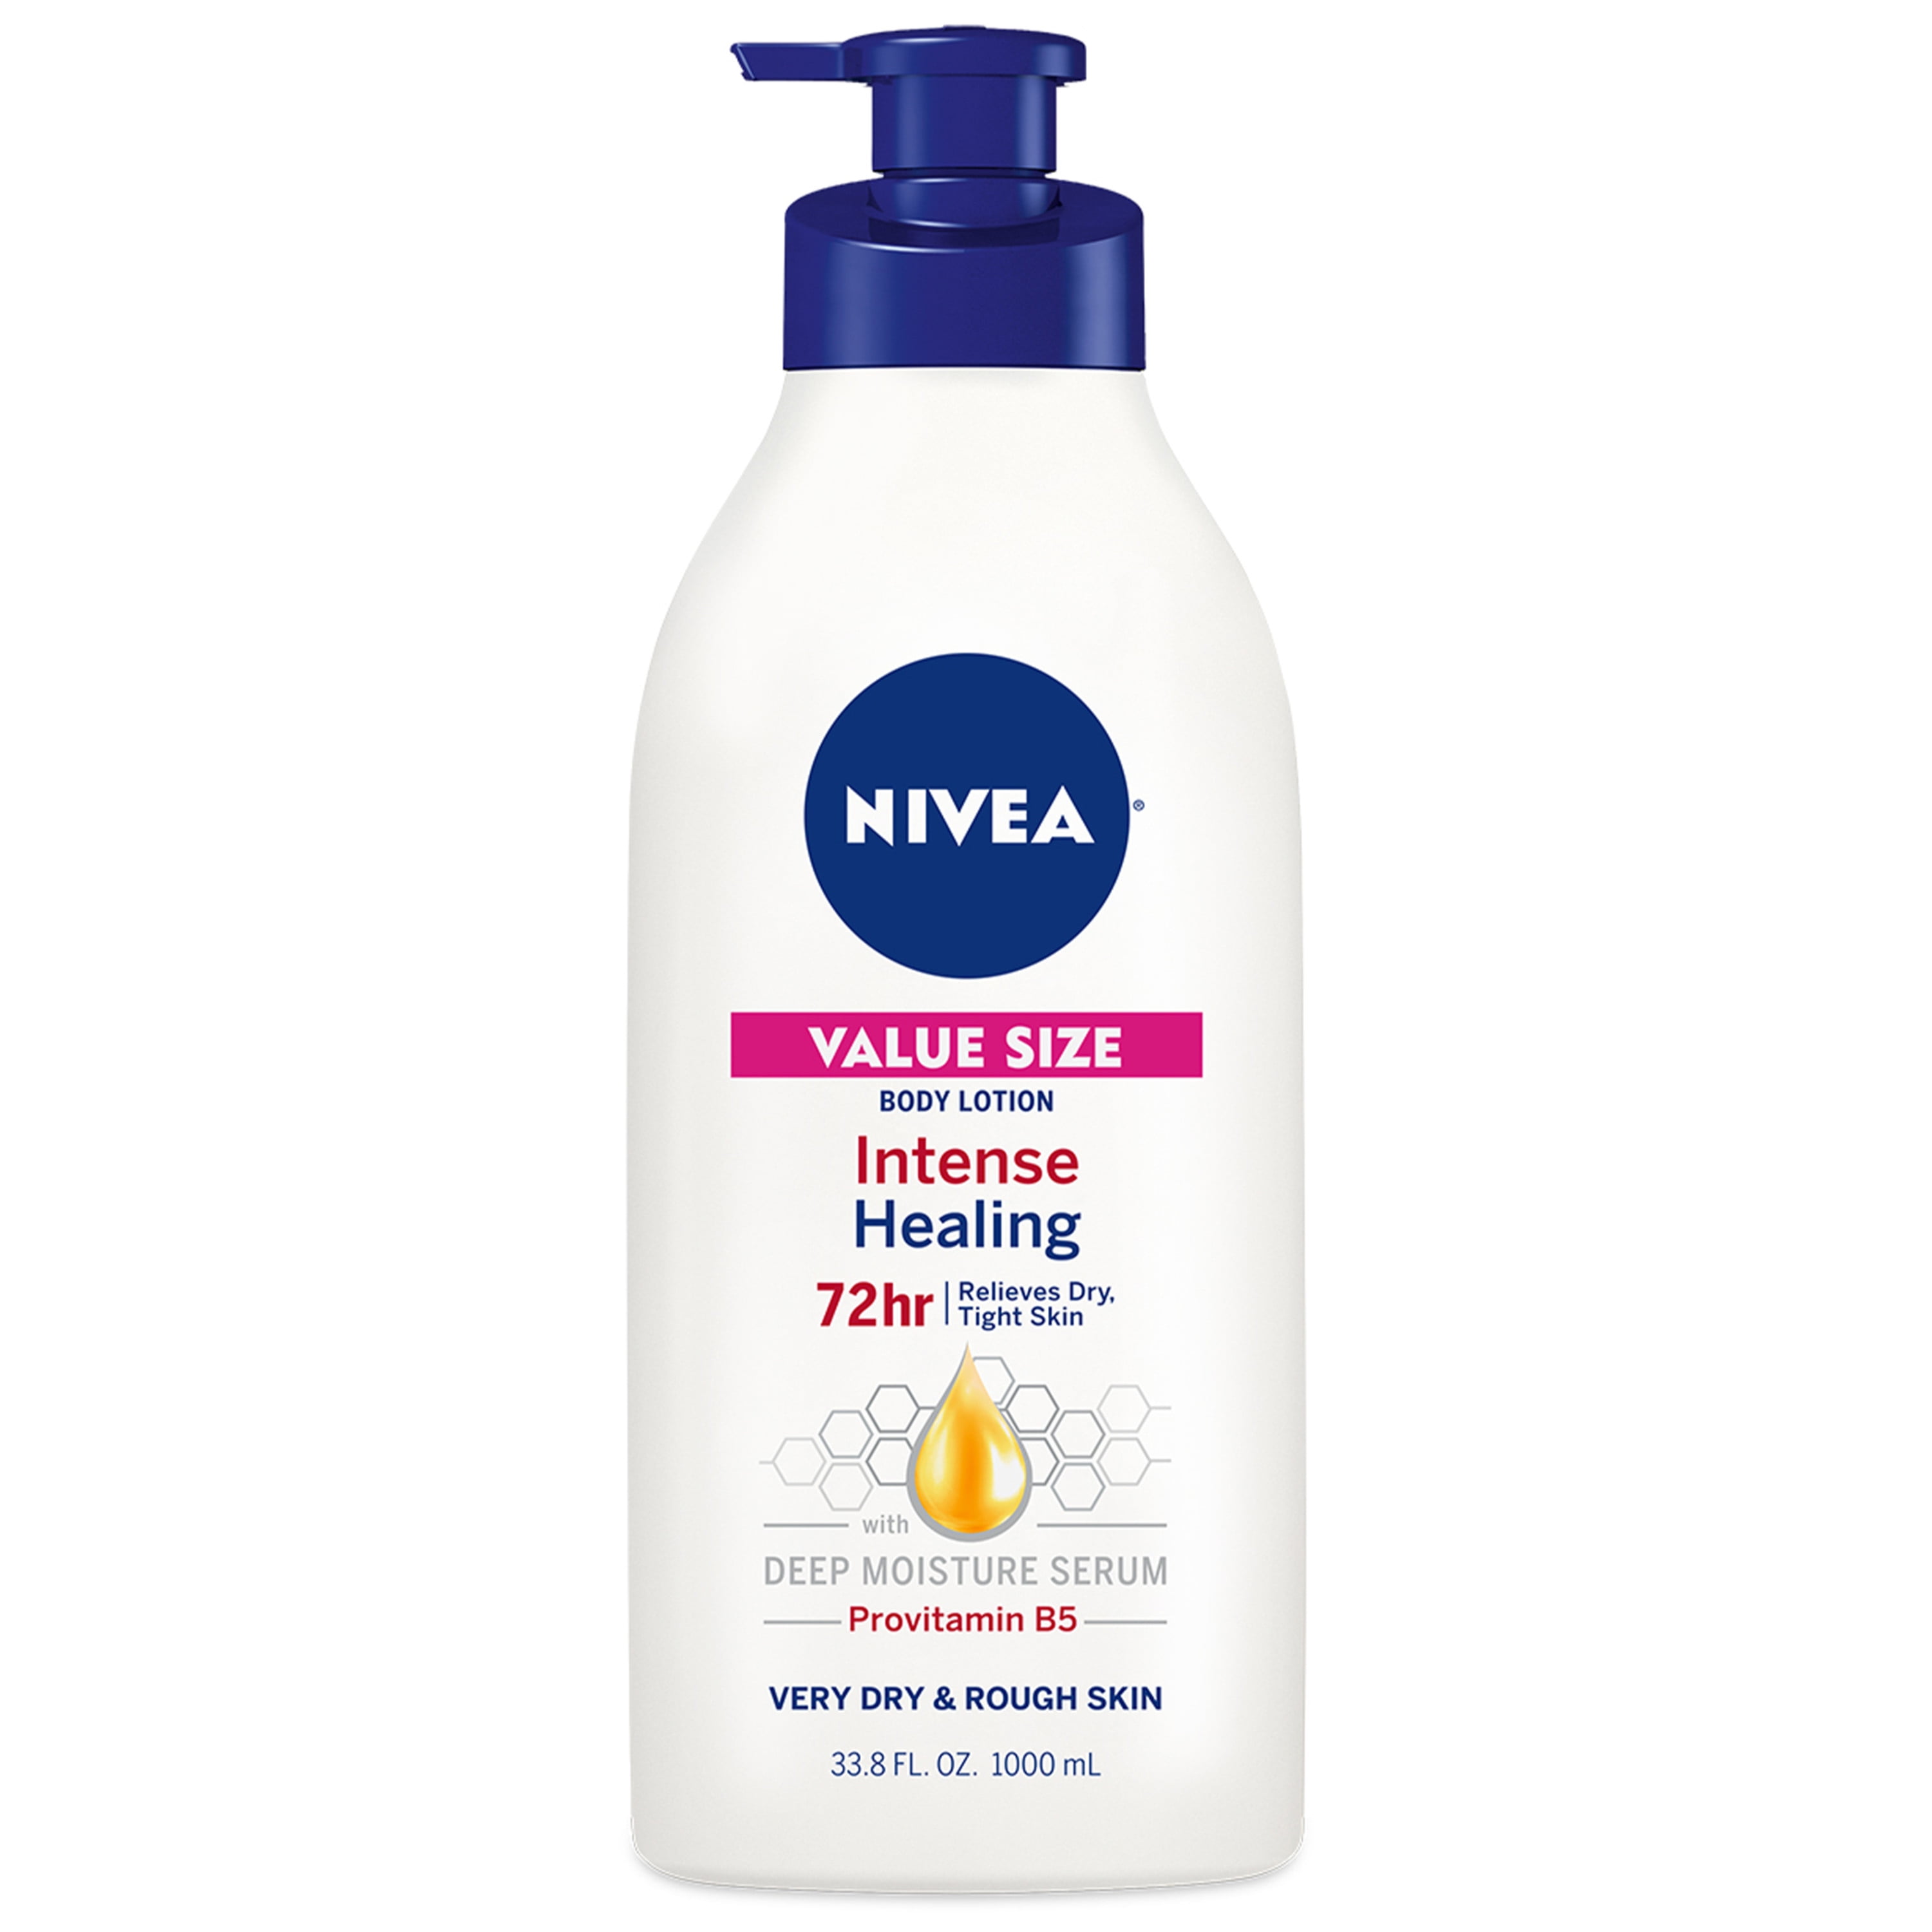 NIVEA Intense Healing Body Lotion, 72 Hour Moisture for Dry to Very Dry Skin, 33.8 Fl Oz Pump Bottle